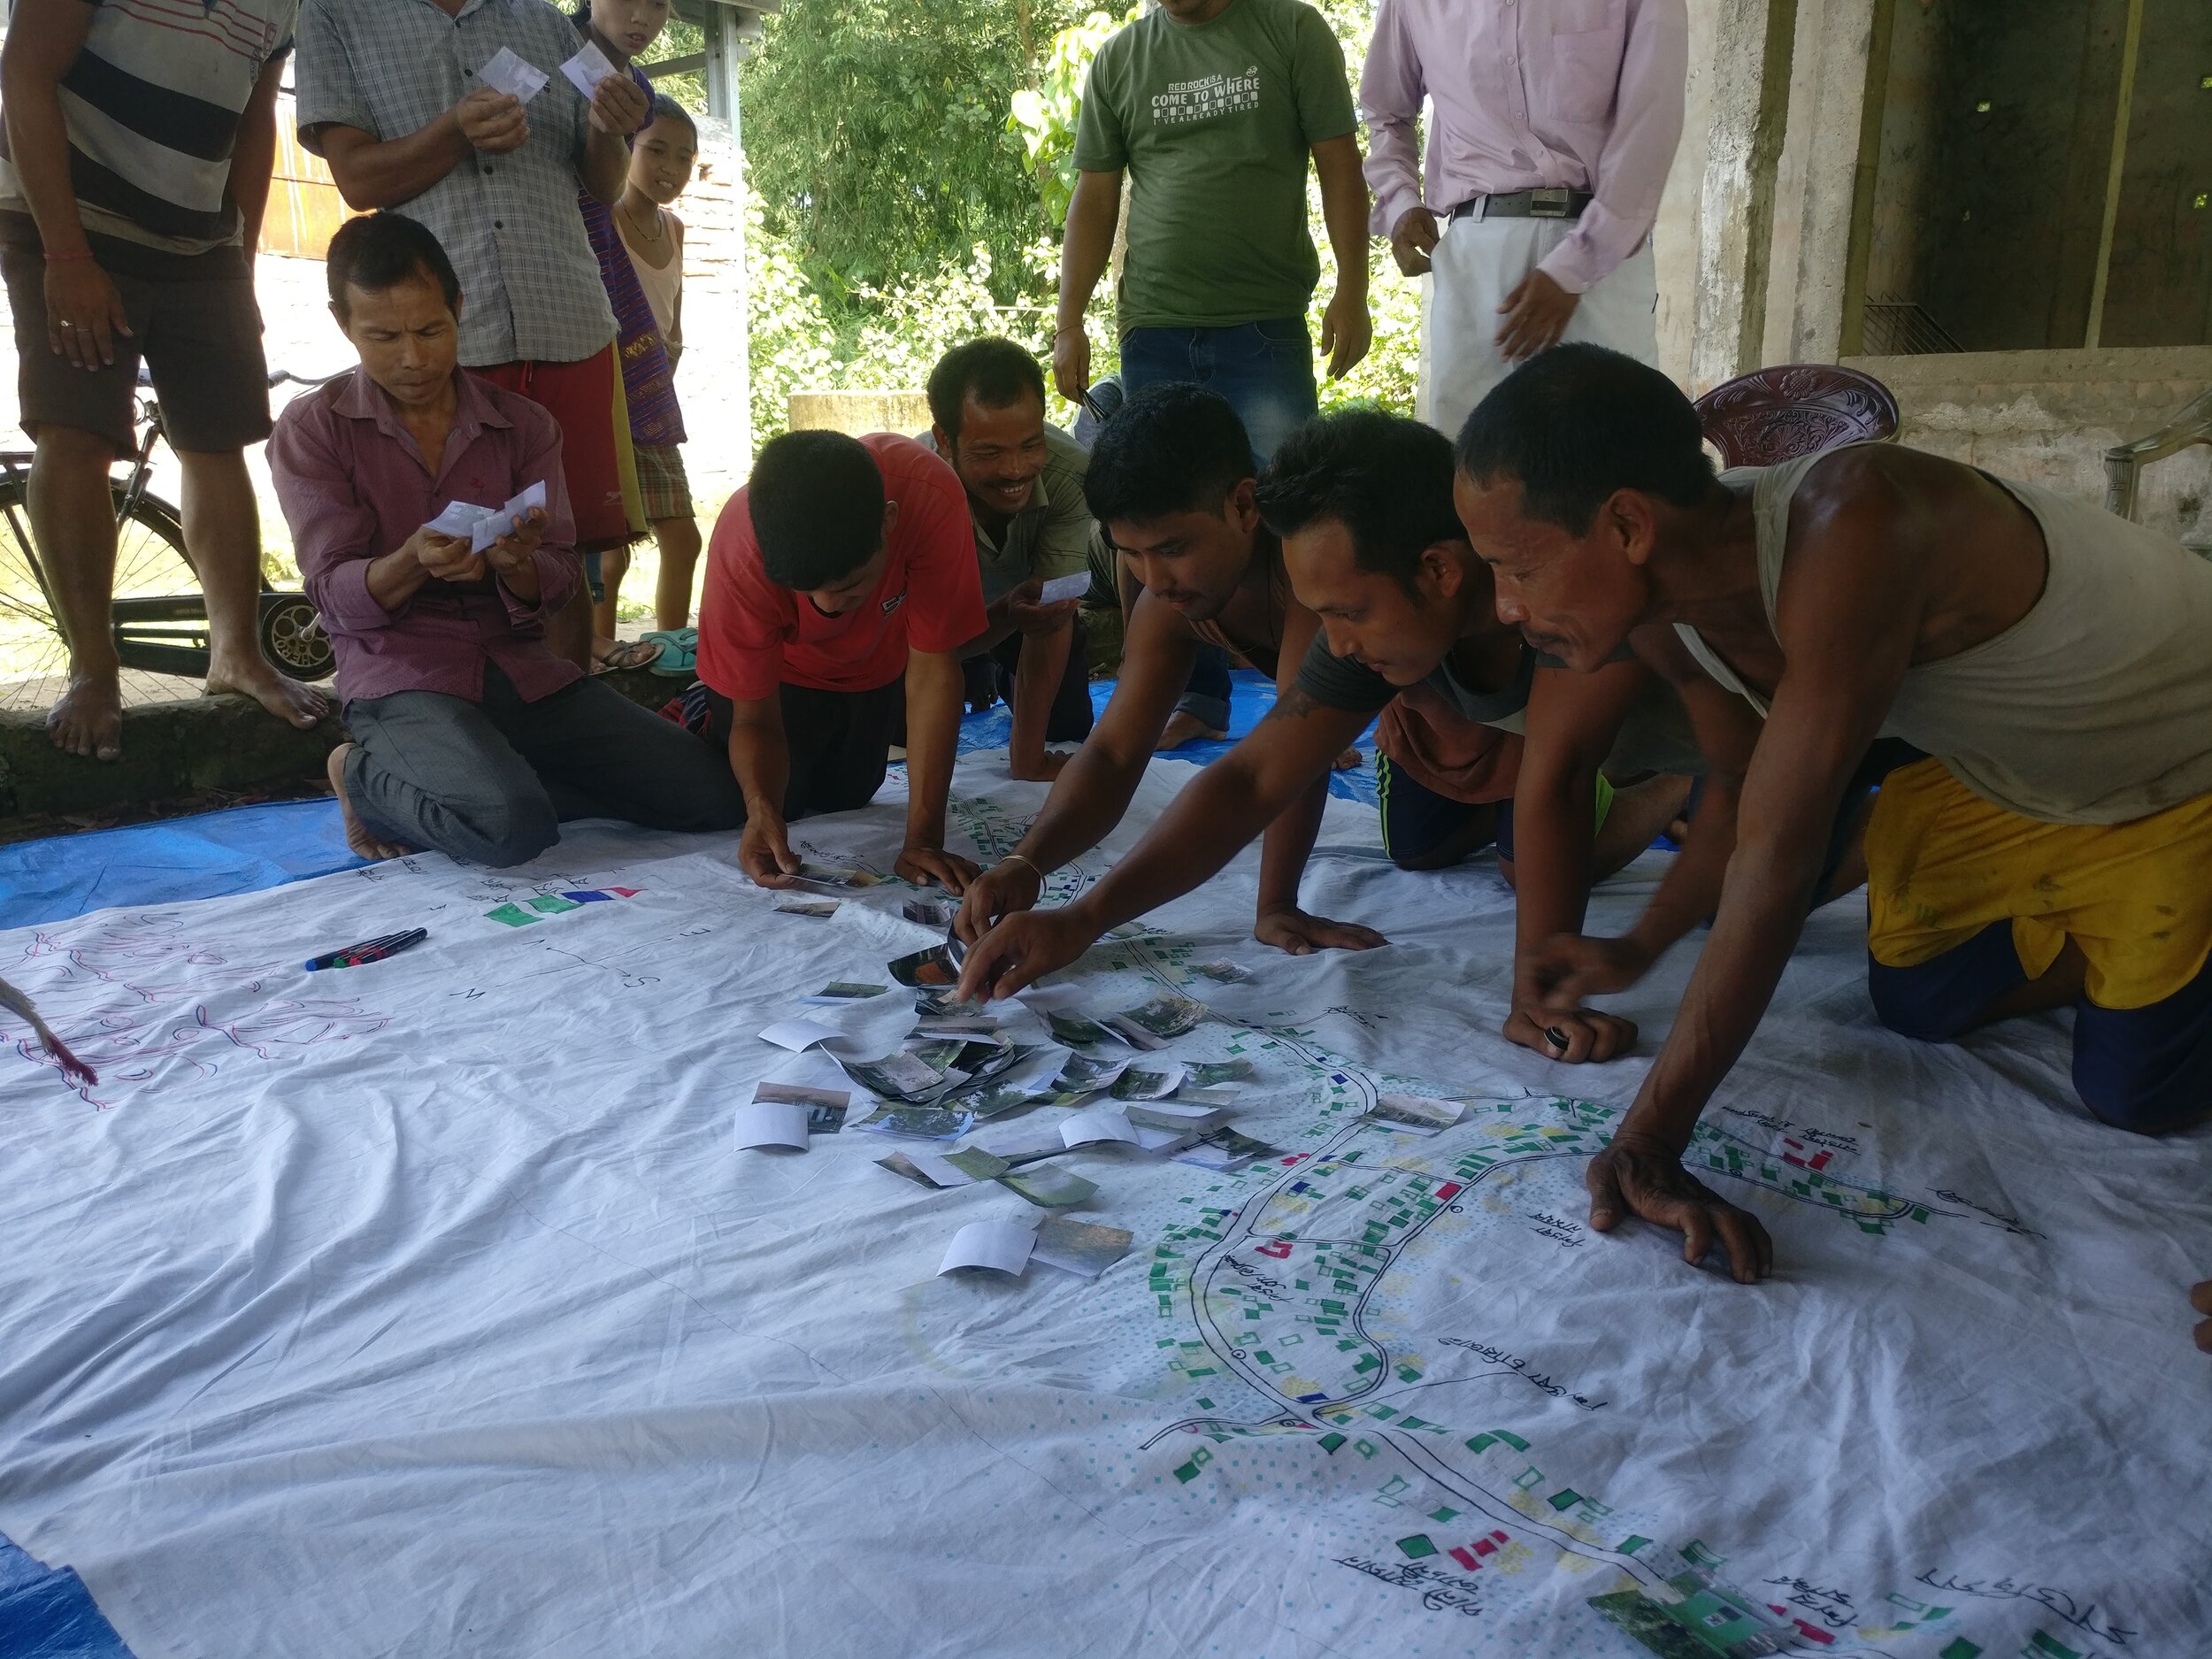 Drishtee Foundation and IHF present the villagers with a large-scale map of their village on which they identify all community and household assets